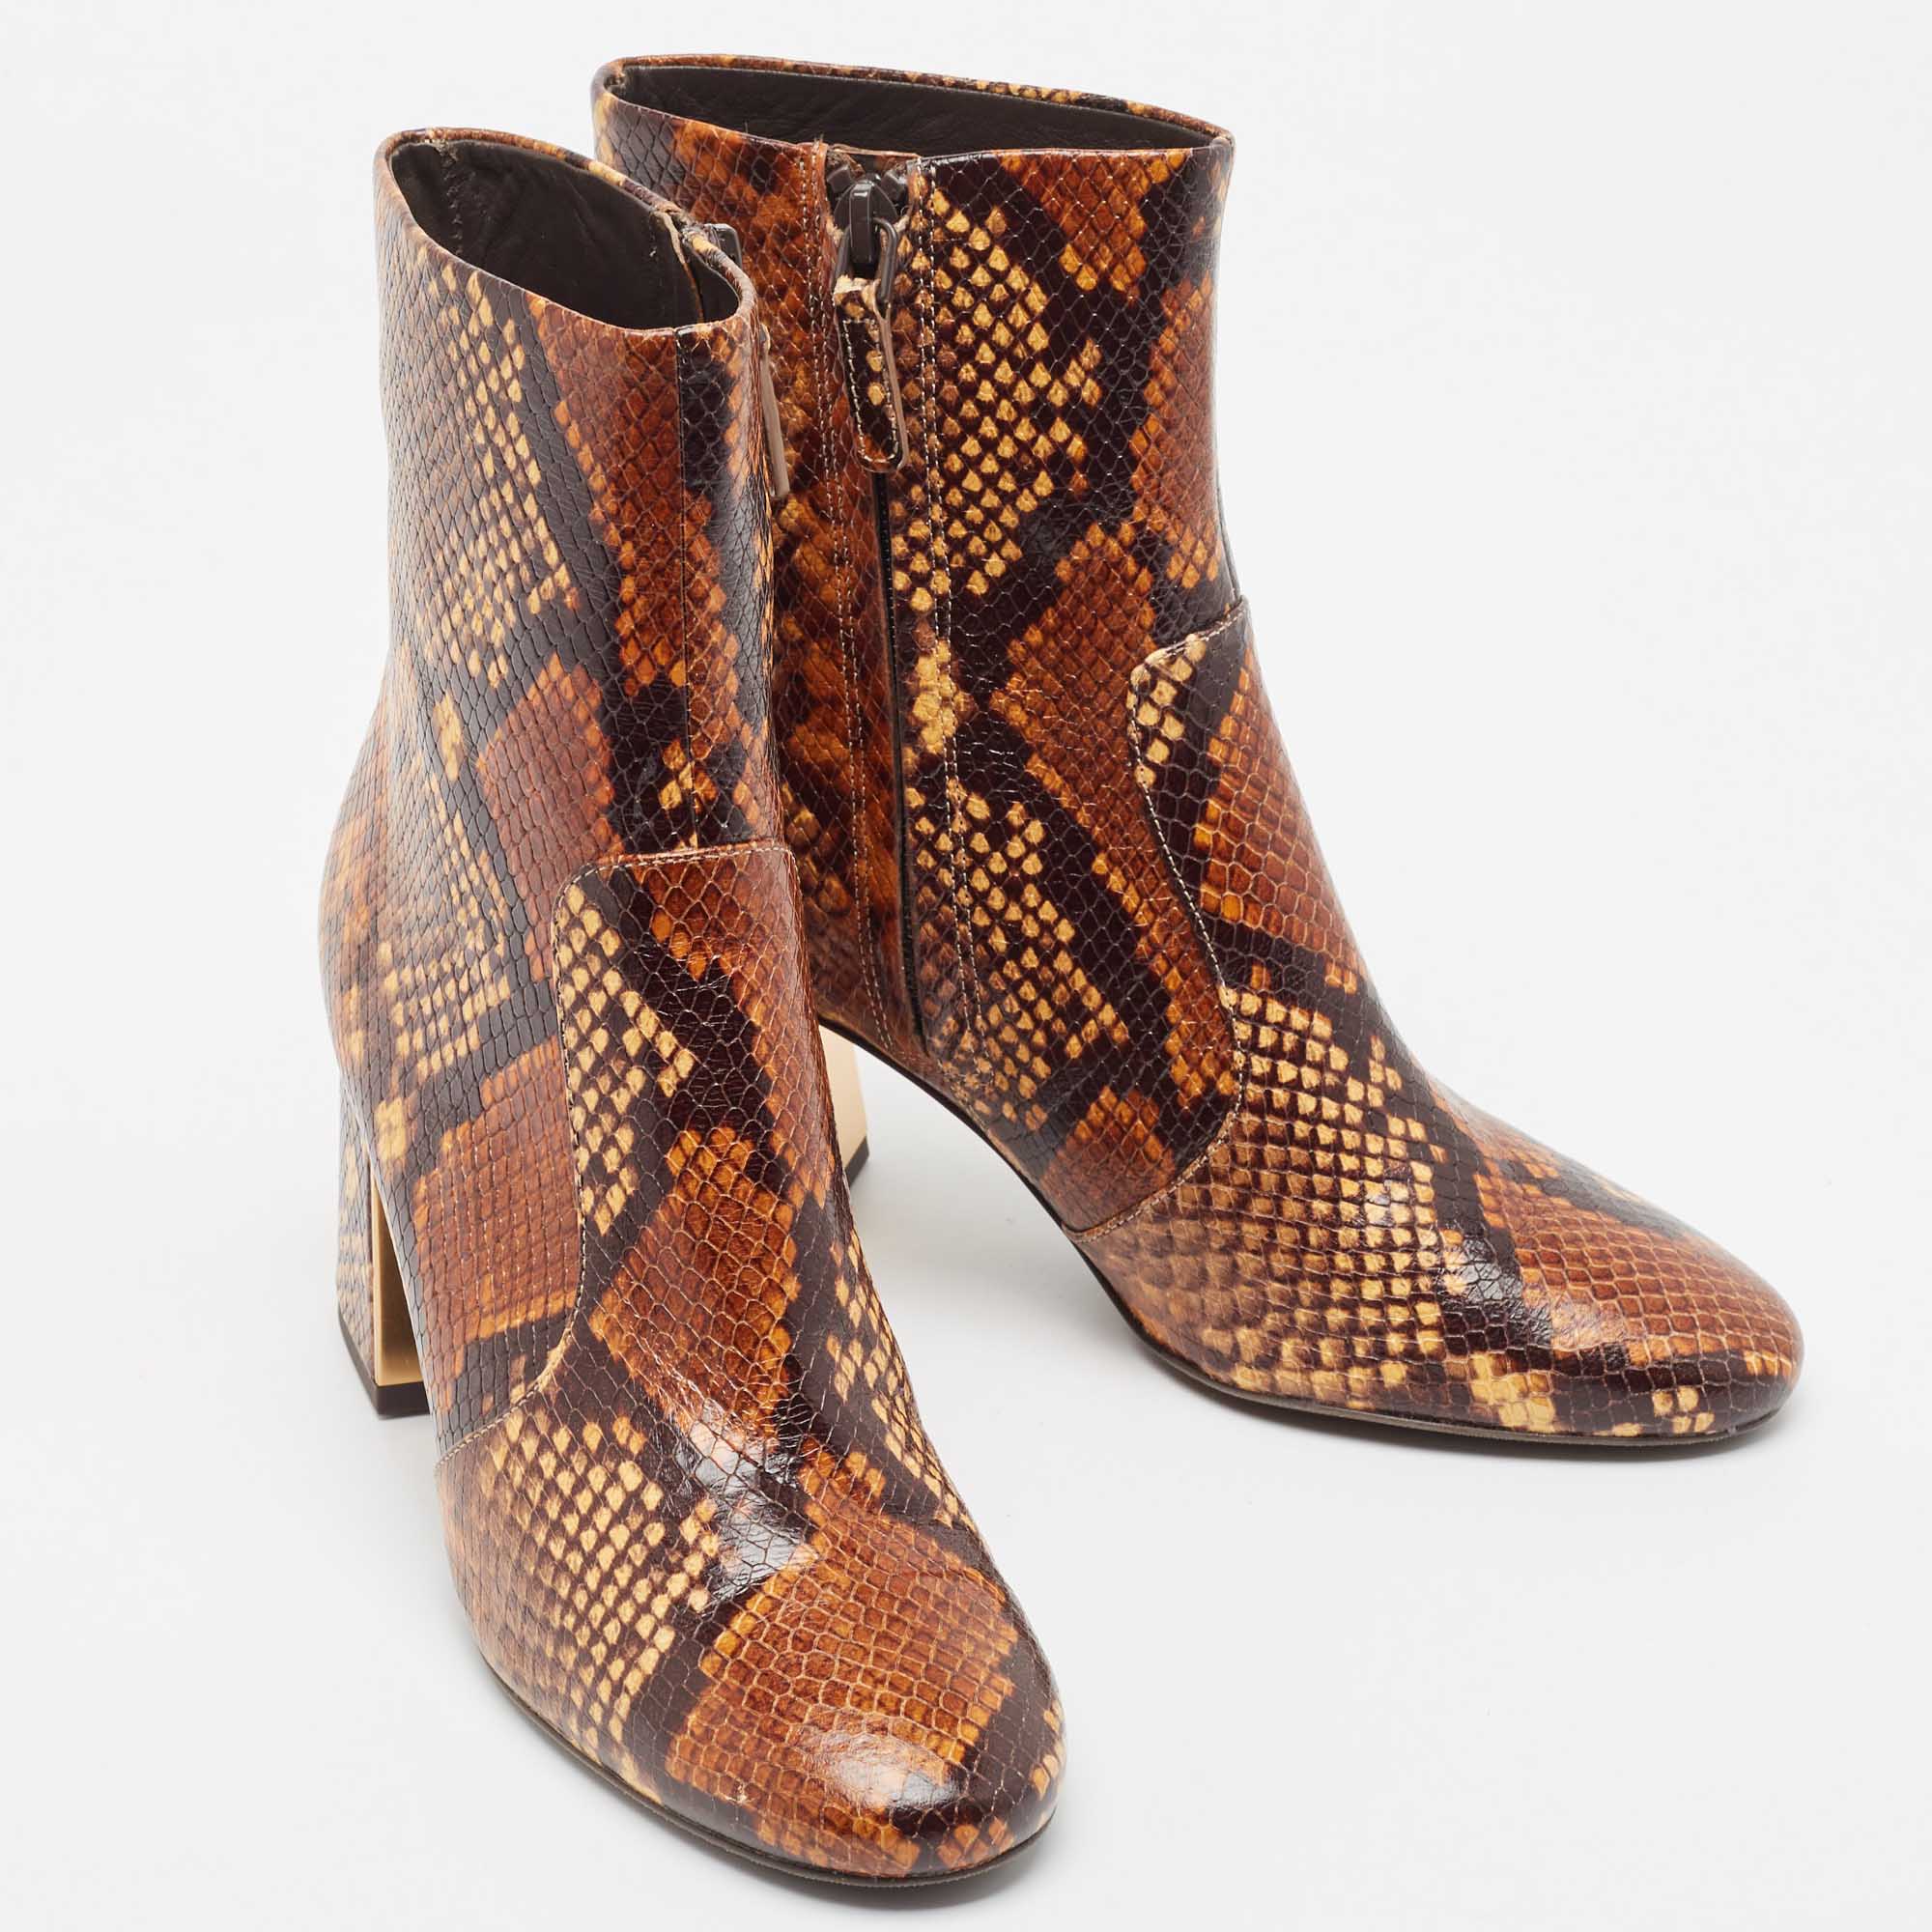 Tory Burch Brown Python Embossed Leather Ankle Boots Size 37.5